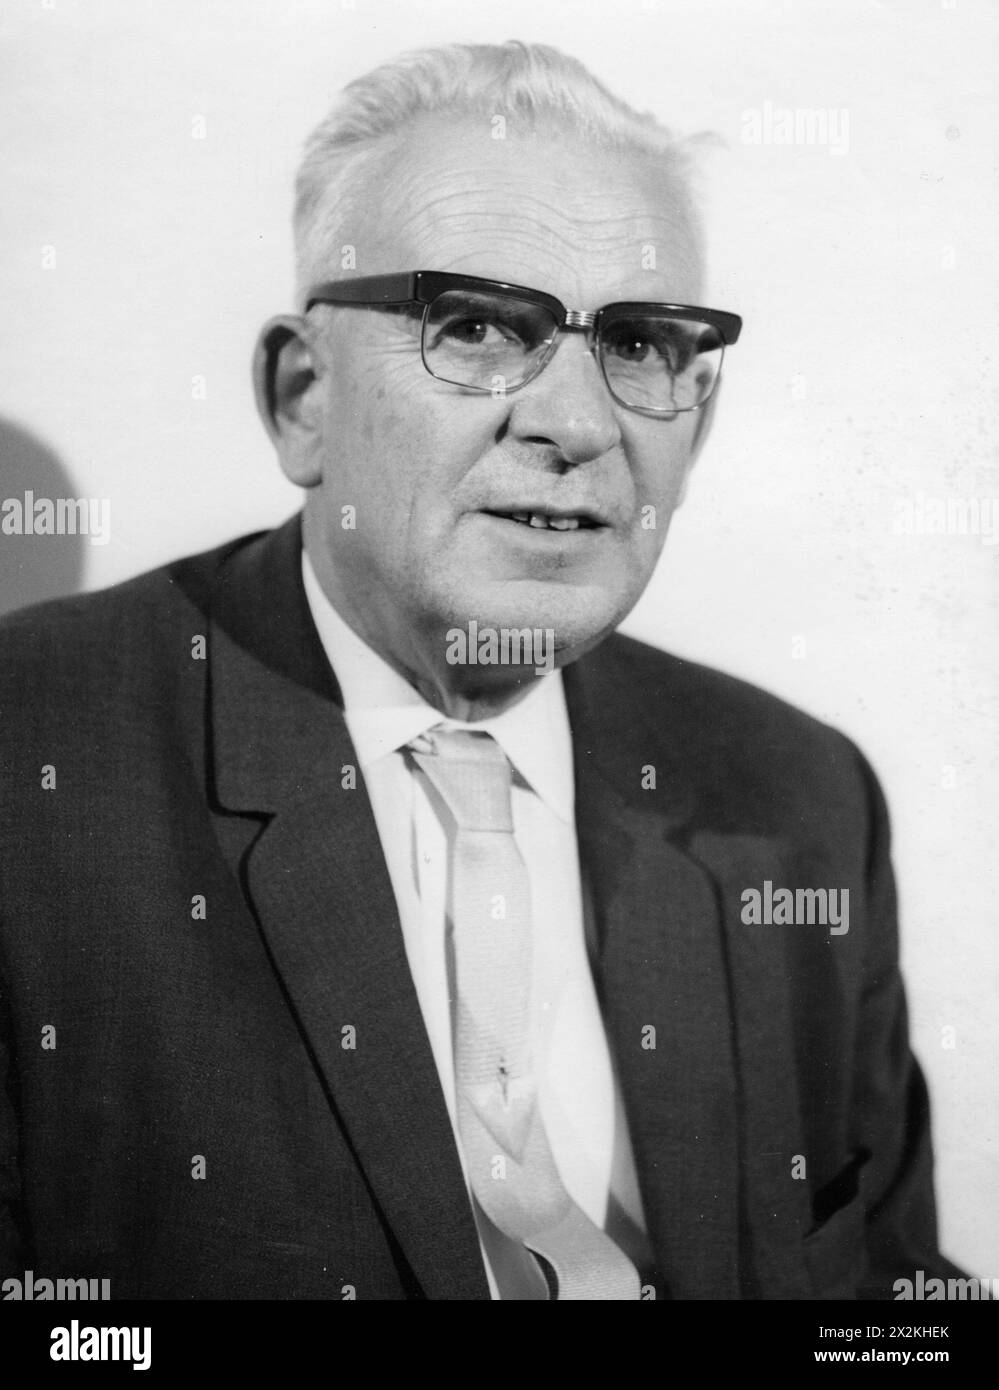 Schober, Herbert, 14.3.1905 - 15.6,1975, physicien allemand-autrichien et ophtalmologiste, ADDITIONAL-RIGHTS-CLEARANCE-INFO-NOT-AVAILABLE Banque D'Images